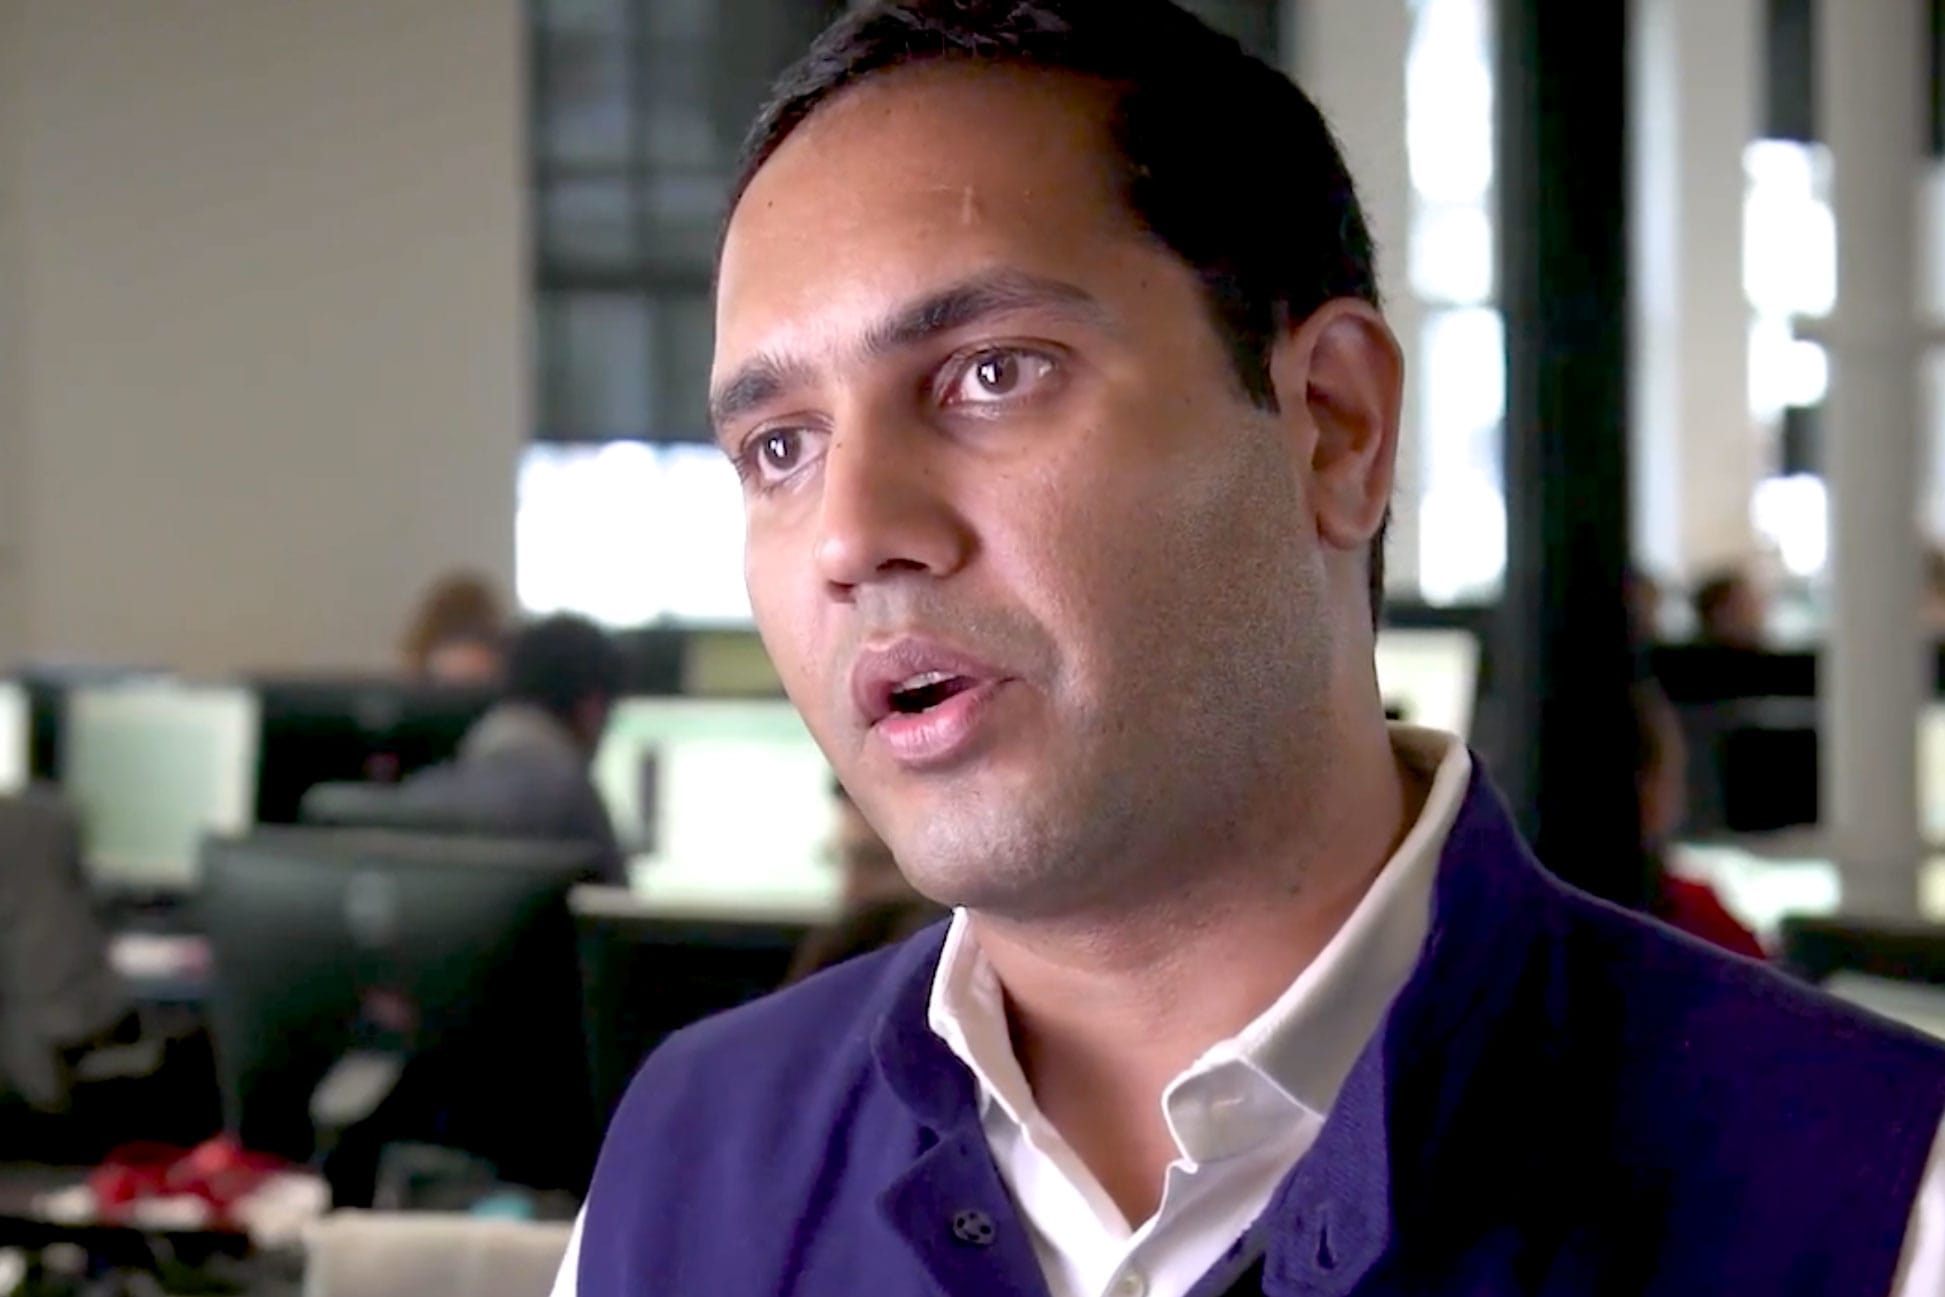 Better founder Vishal Garg who did mass Zoom layoff returns as CEO – CNBC